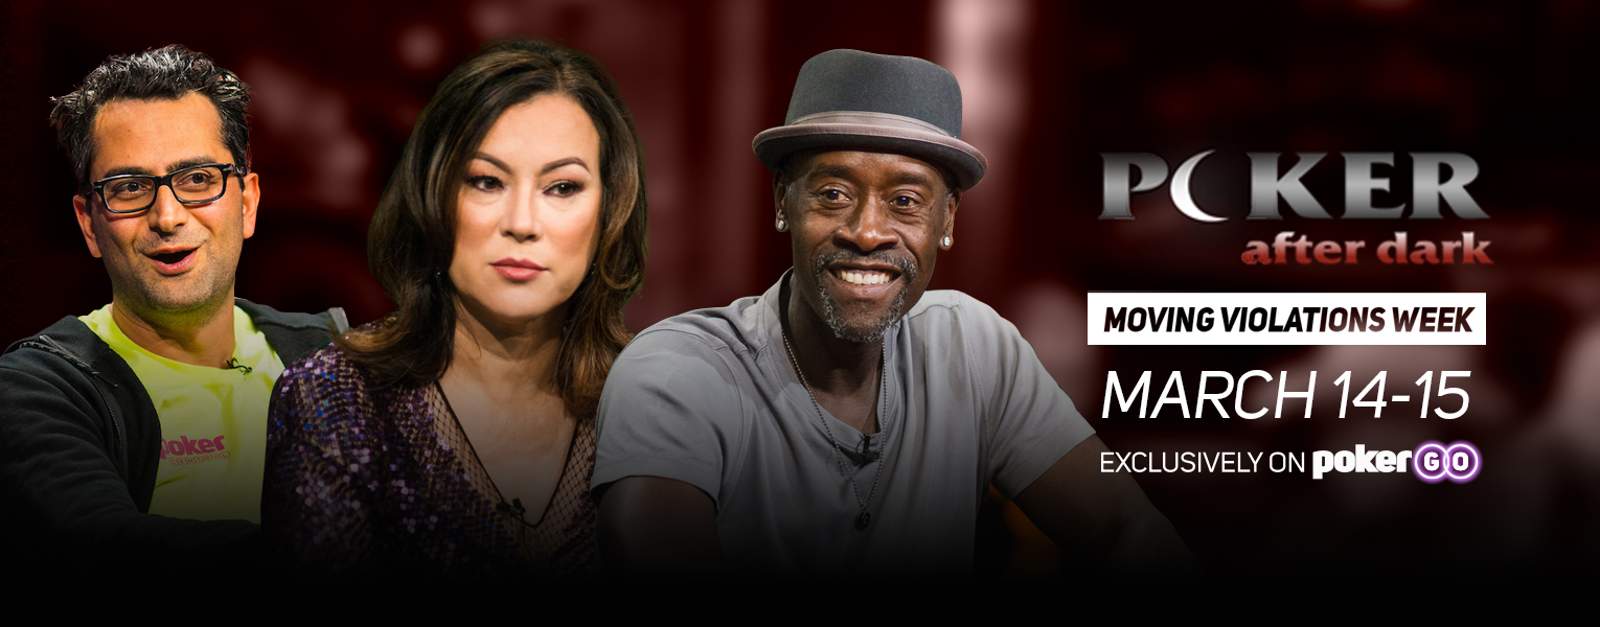 Jennifer Tilly, Don Cheadle Set to Star in "Moving Violations" Week on "Poker After Dark"